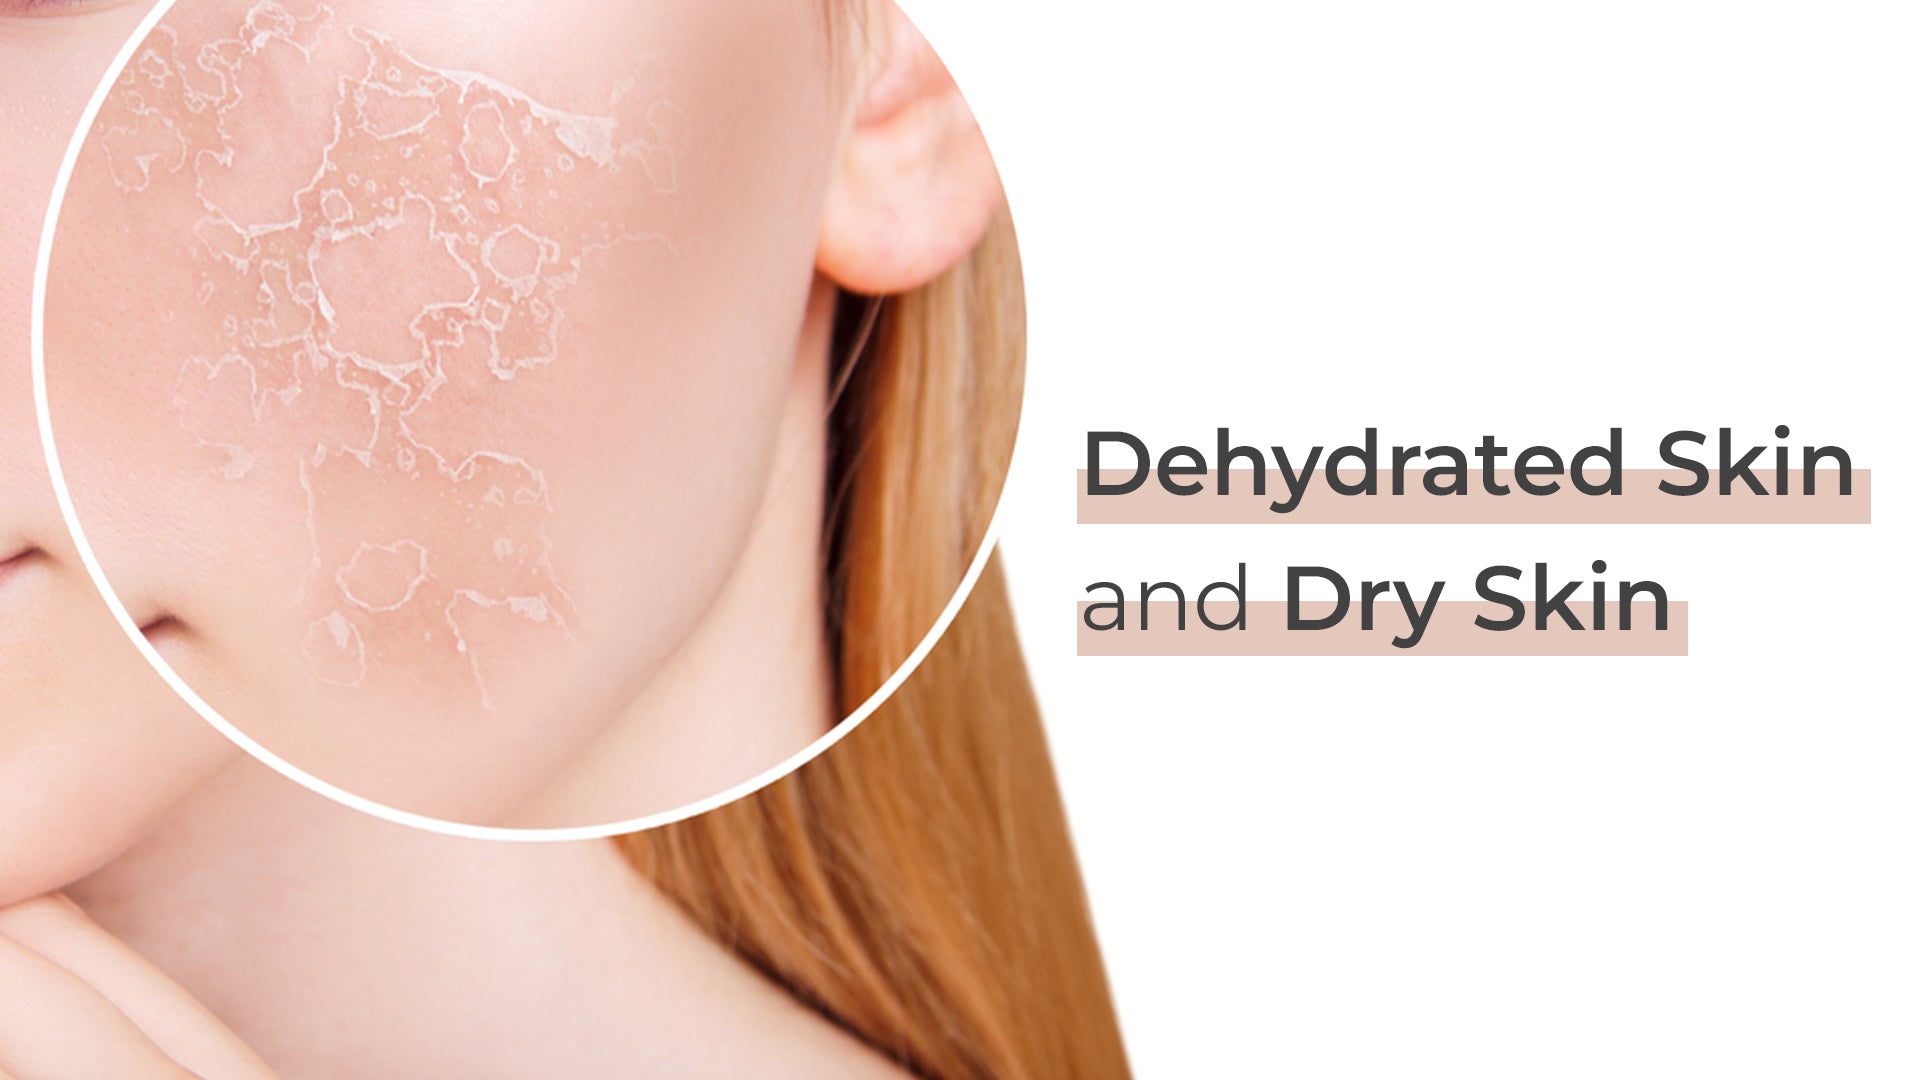 Understand the difference between dehydrated skin and dry skin